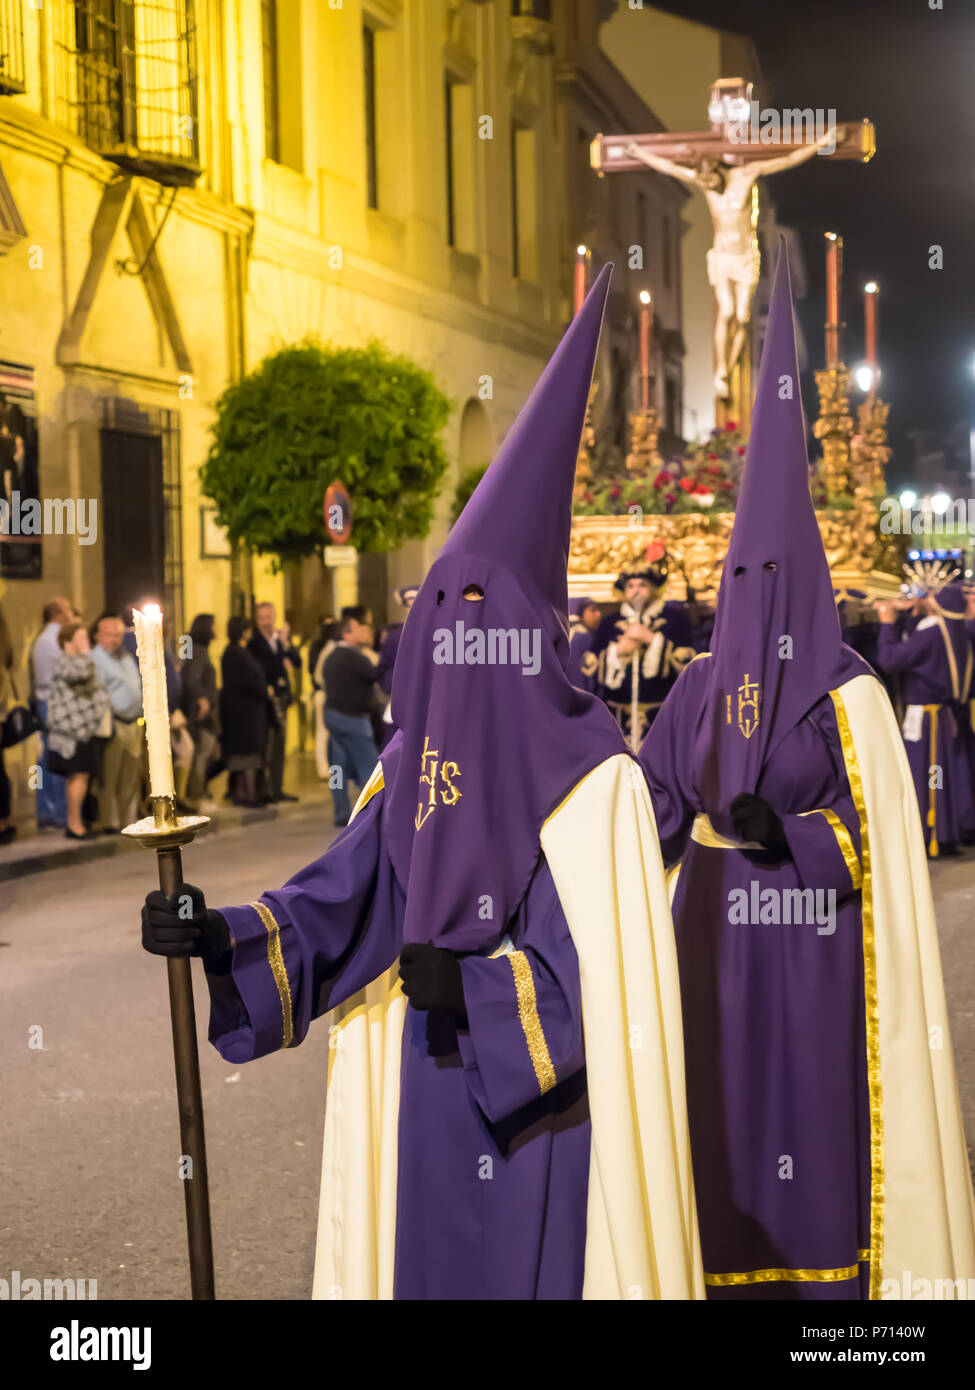 Antequera, known for traditional Semana Santa (Holy Week) processions leading up to Easter, Antequera, Andalucia, Spain, Europe Stock Photo